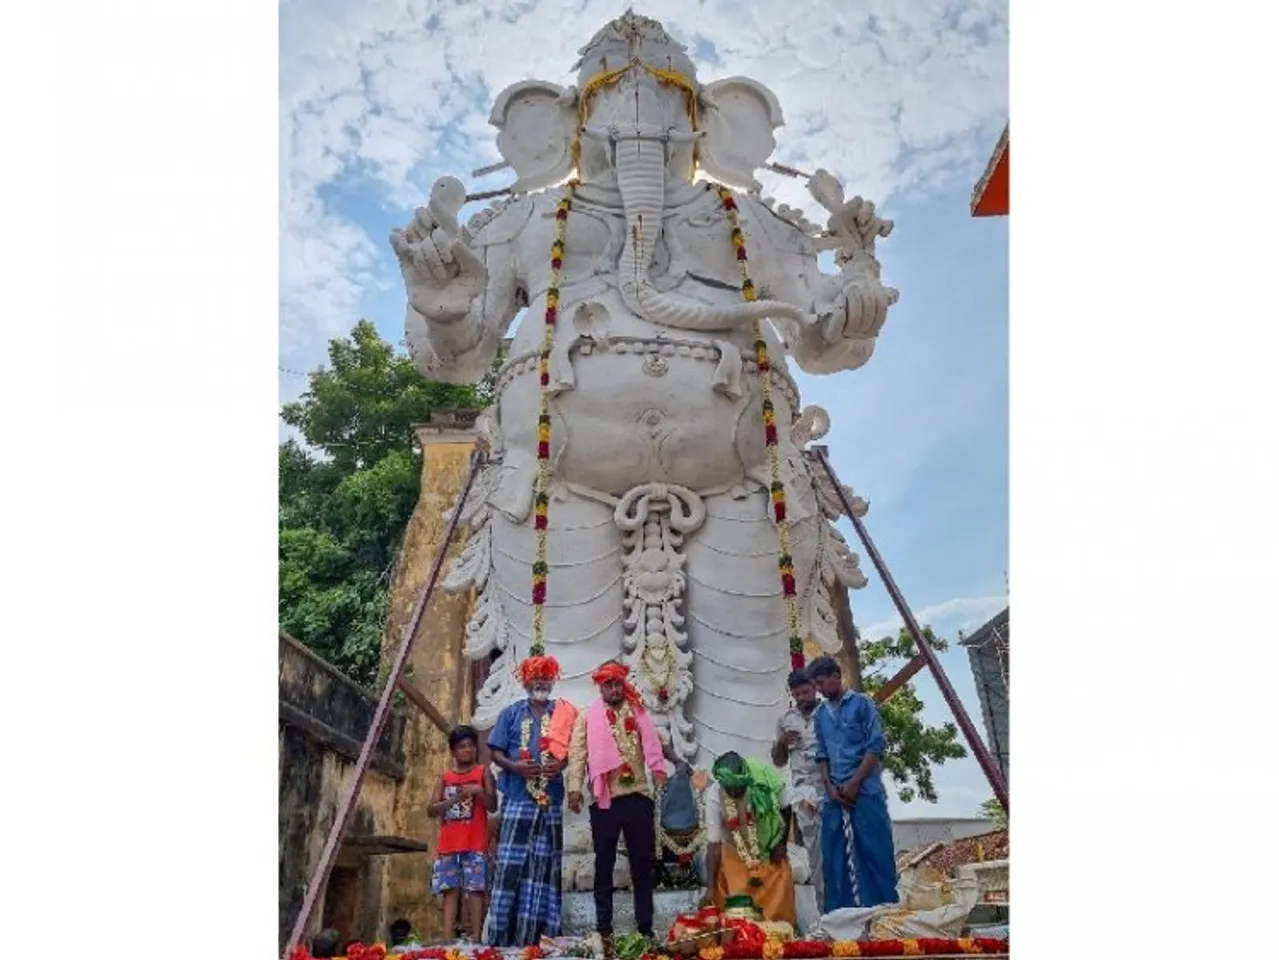 A 32-ft tall idol of Lord Ganesha made of fig tree wood, being decorated for the festival of Ganesh Chaturthi, in Nagapattinam, Tamil Nadu